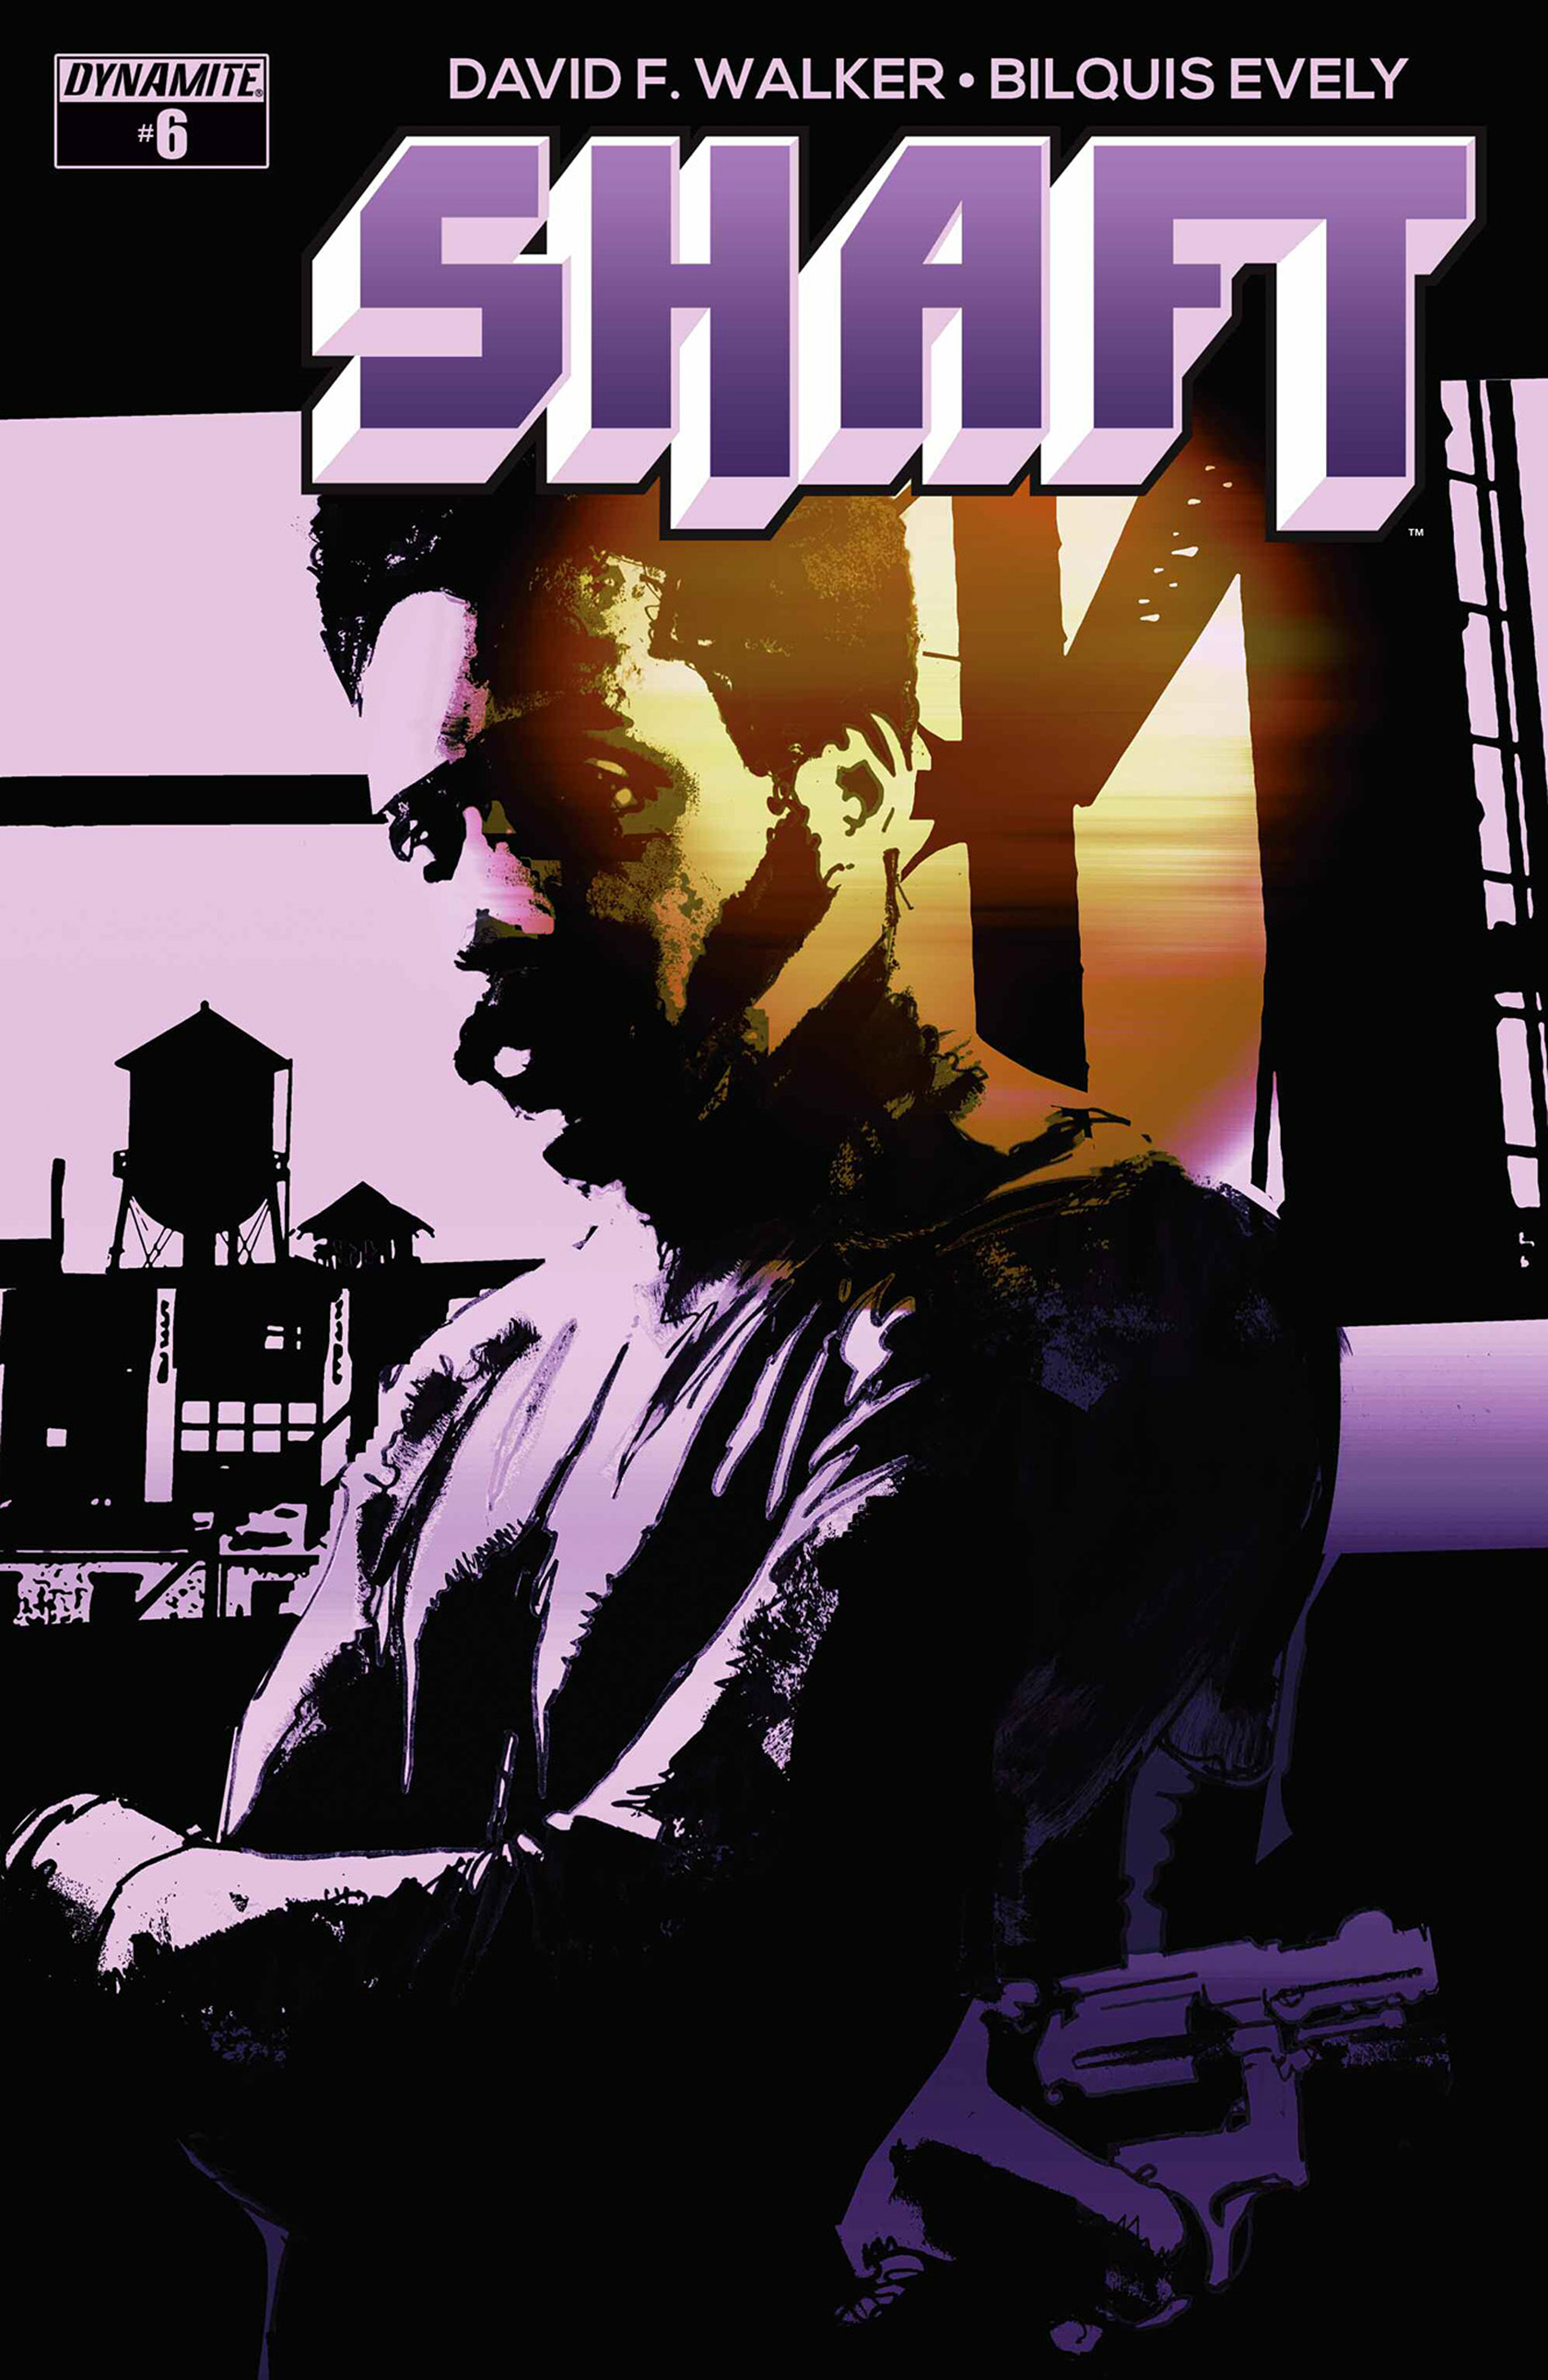 Read online Shaft comic -  Issue #6 - 1